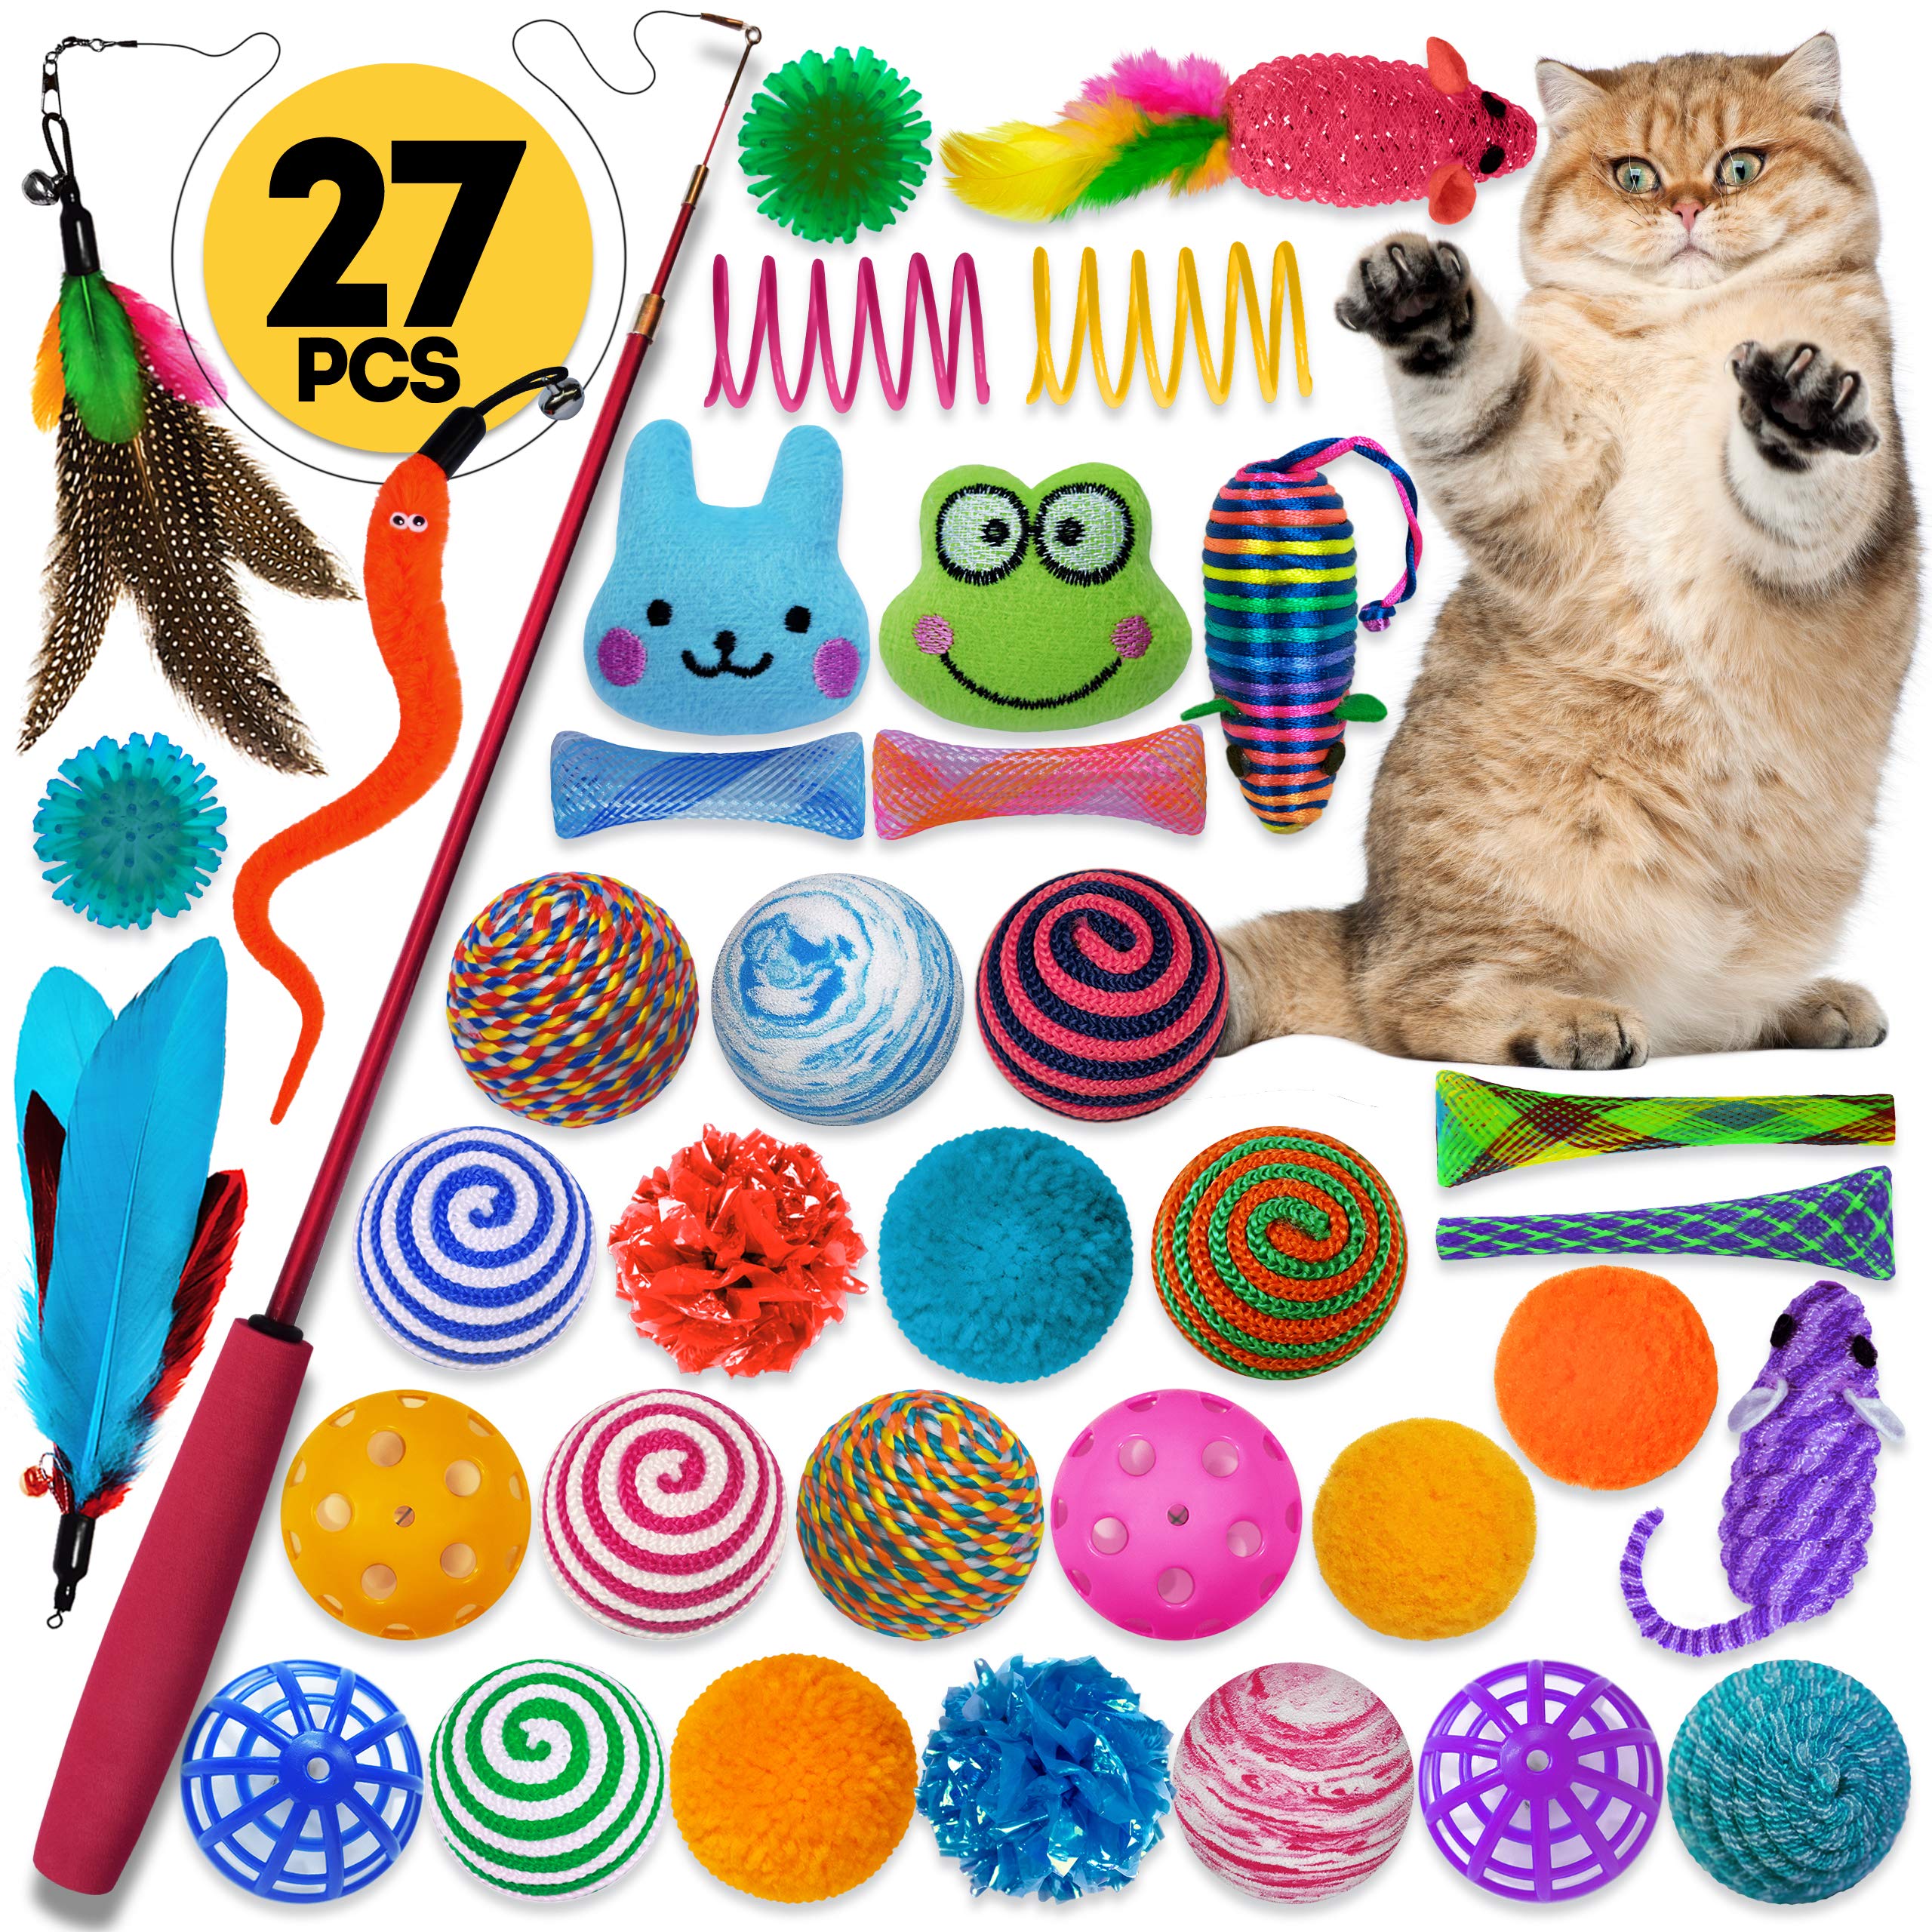 Book Cover XGATML CHDENUO Cowfish Cat Toys Kitten Toys Assortments, 27PCS Variety Toy Set Including Cat Feather Teaser Wand, Feather Toys, Mice, Catnip Toys, Colorful Balls, Bells for Cat, Kitty, Kitten